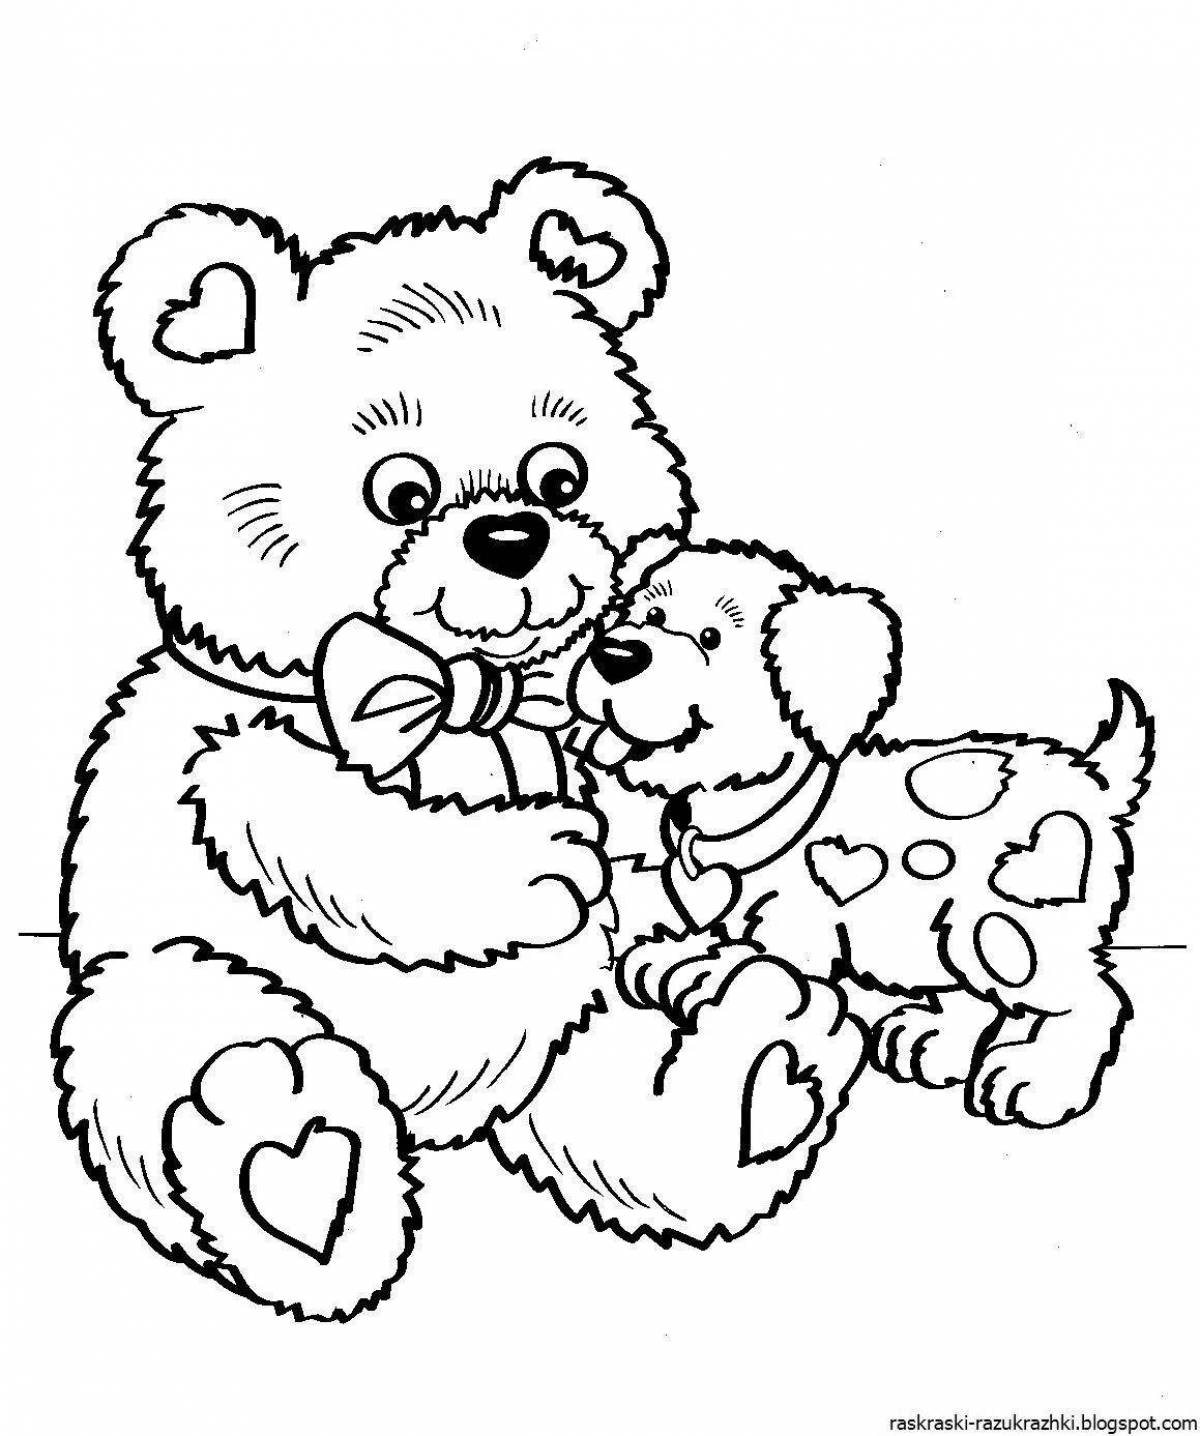 Gorgeous teddy bear coloring book